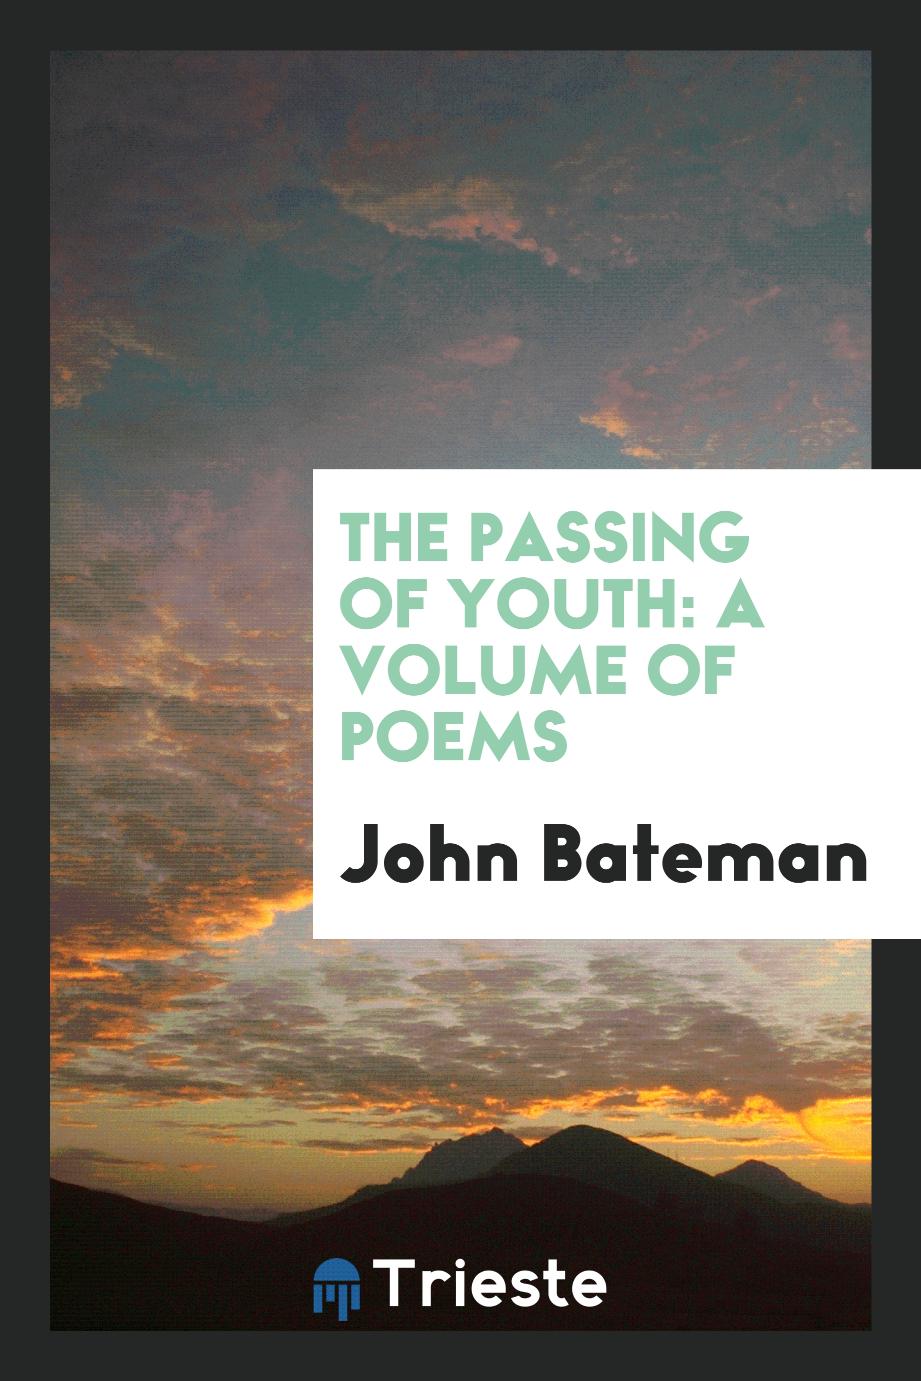 The passing of youth: a volume of poems